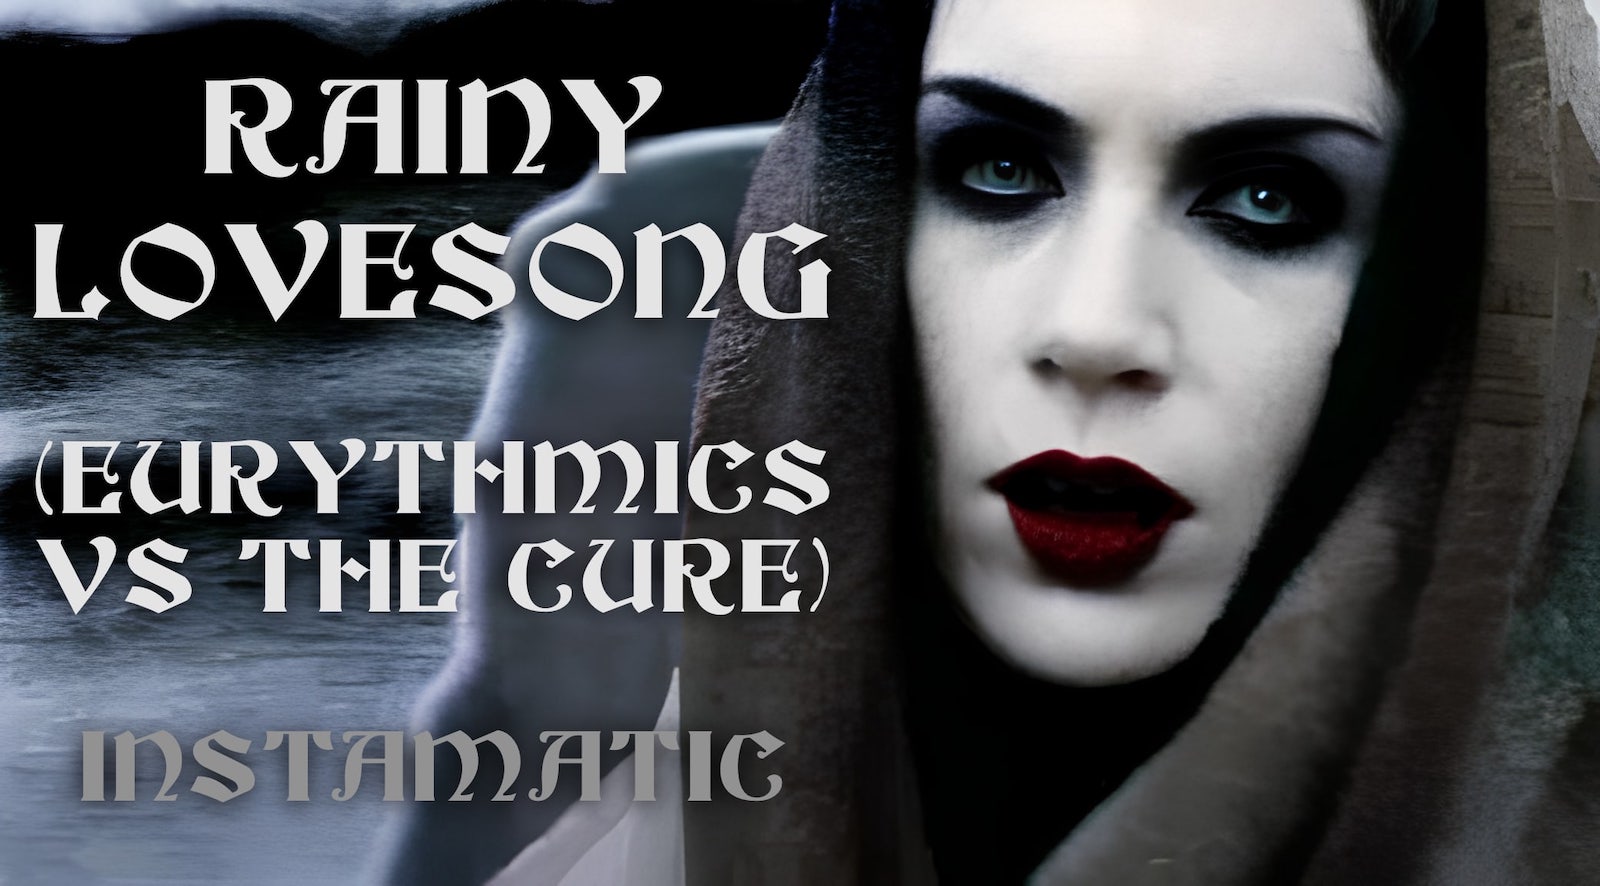 Annie Lennox’s Goth Side Revealed: New Eurythmics vs The Cure